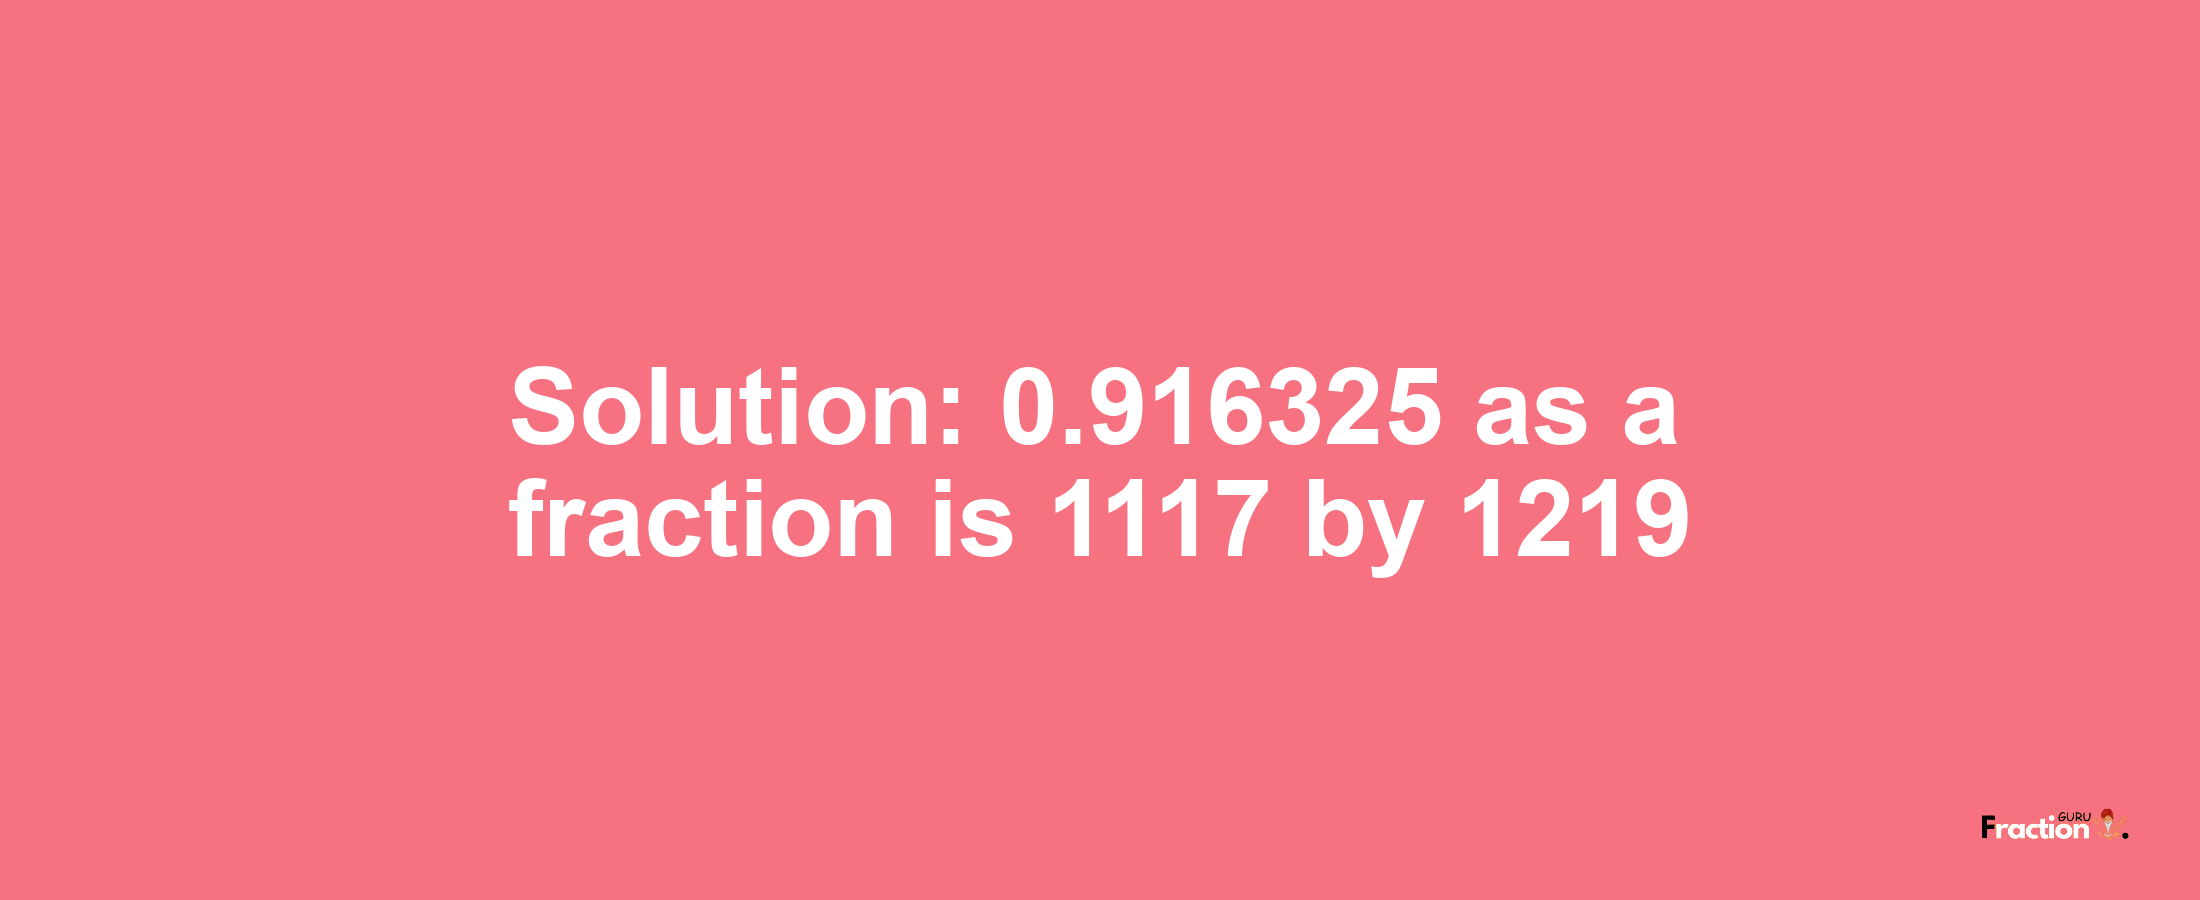 Solution:0.916325 as a fraction is 1117/1219